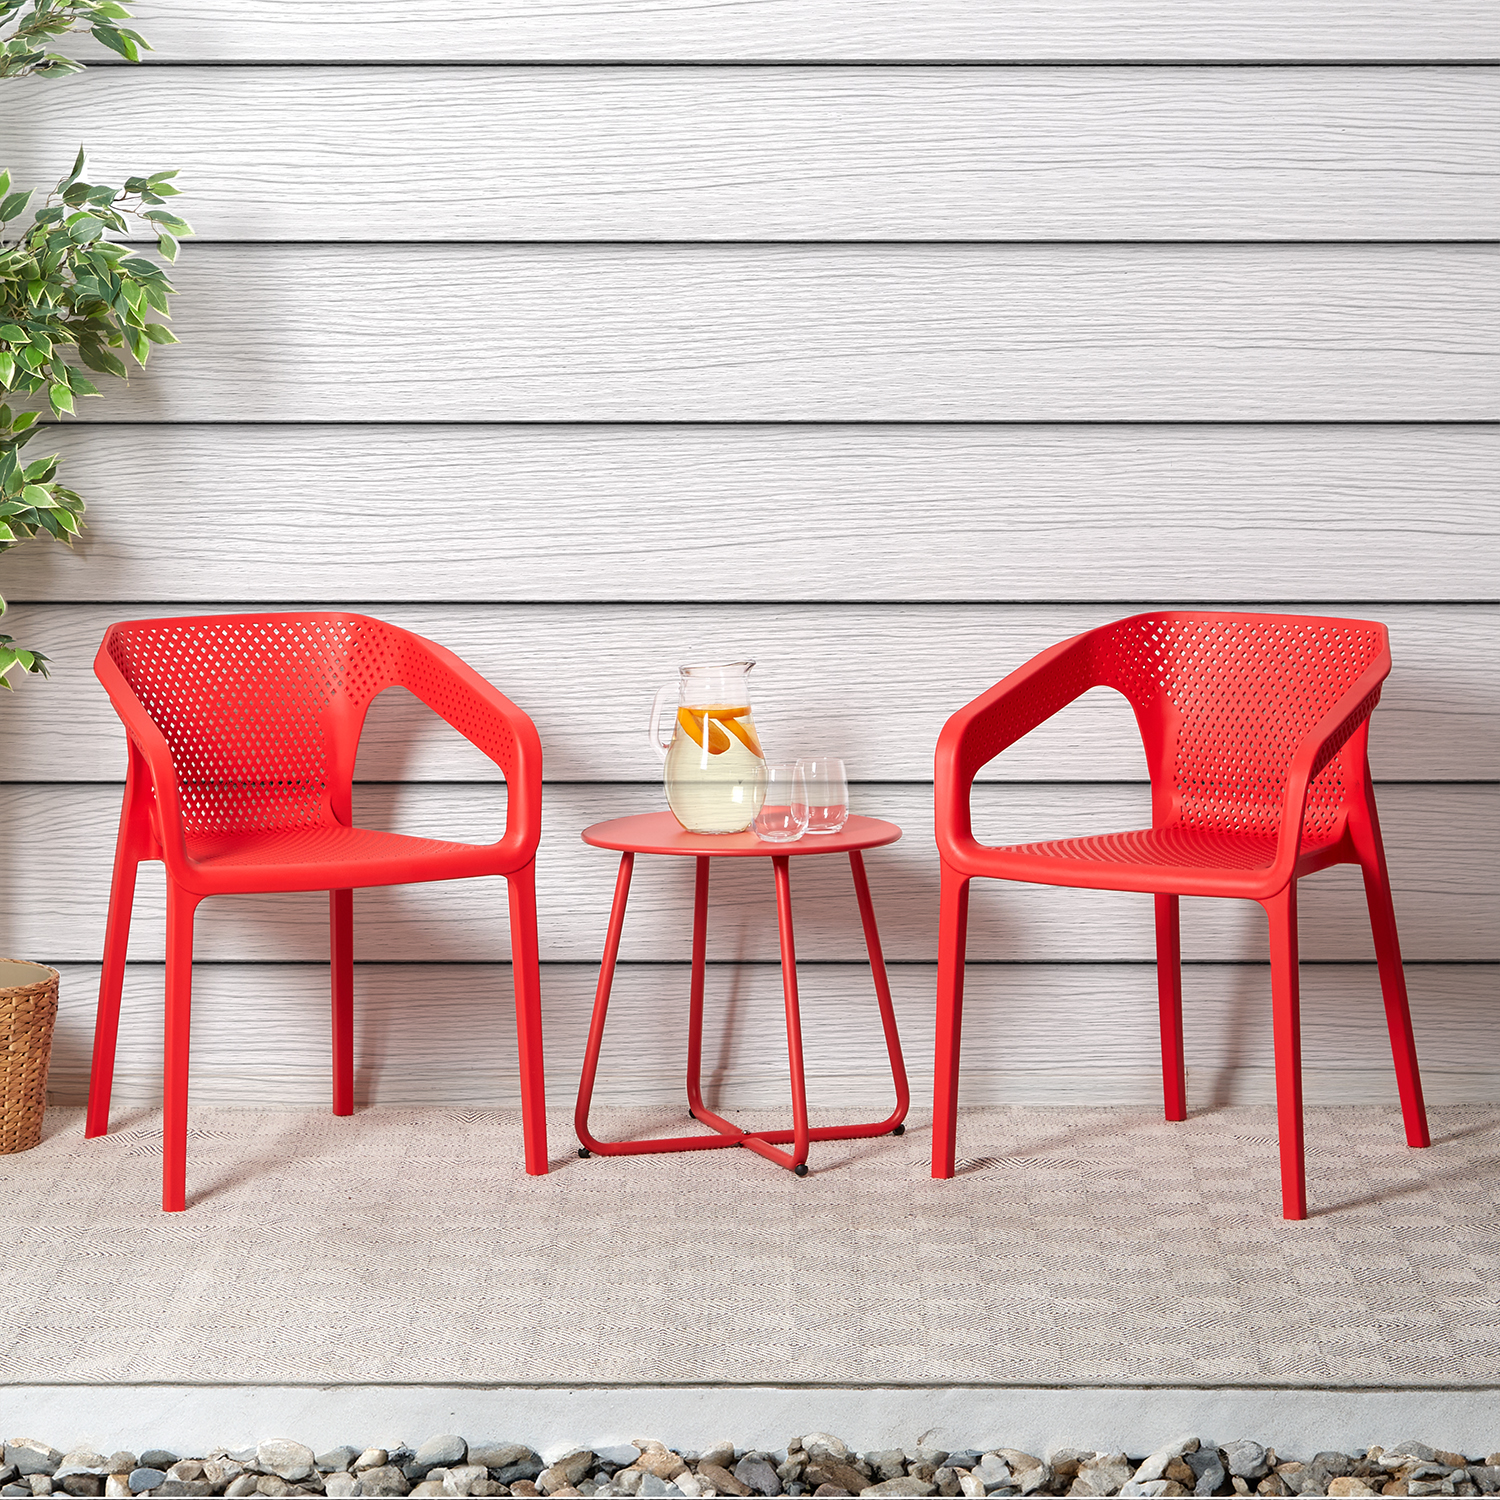 Set of 6 Garden chair with armrests Camping chairs Red Outdoor chairs Plastic Egg chair Lounger chairs Stacking chairs